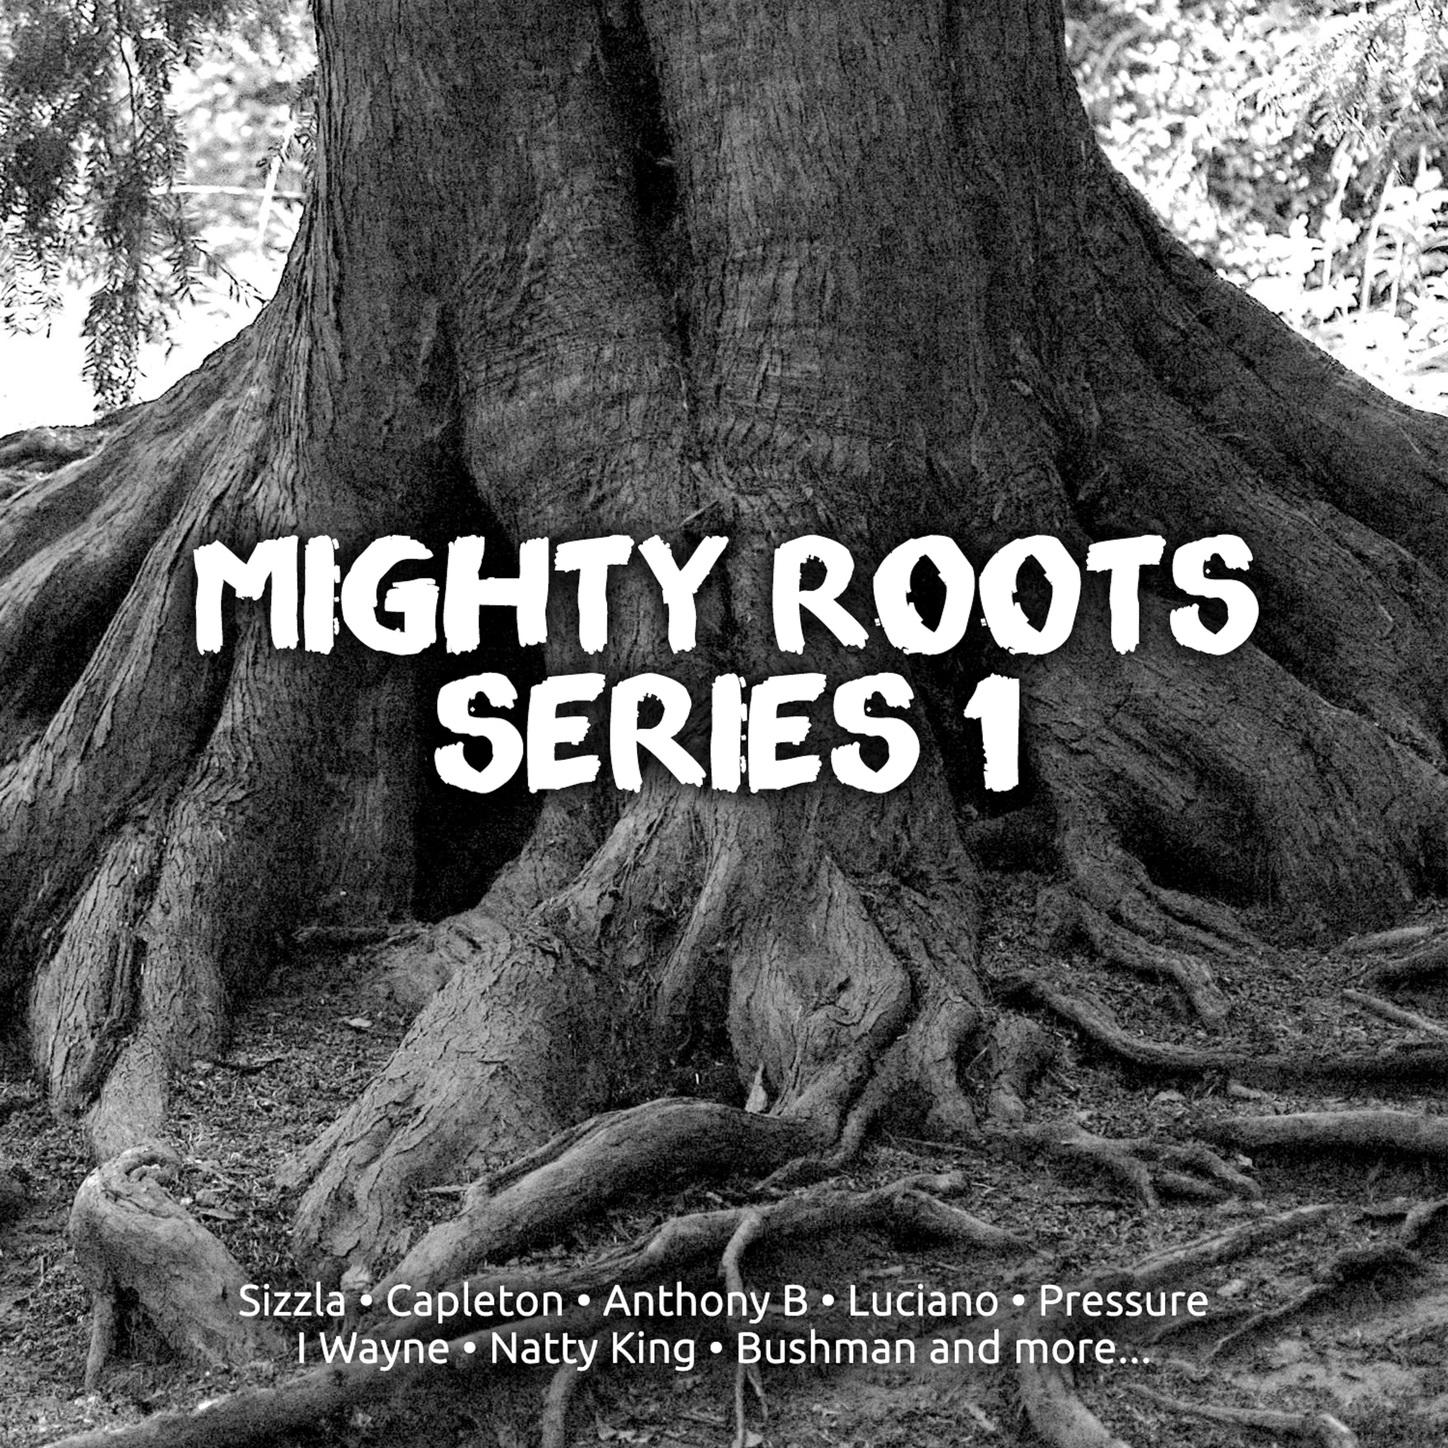 Mighty Roots Series 1